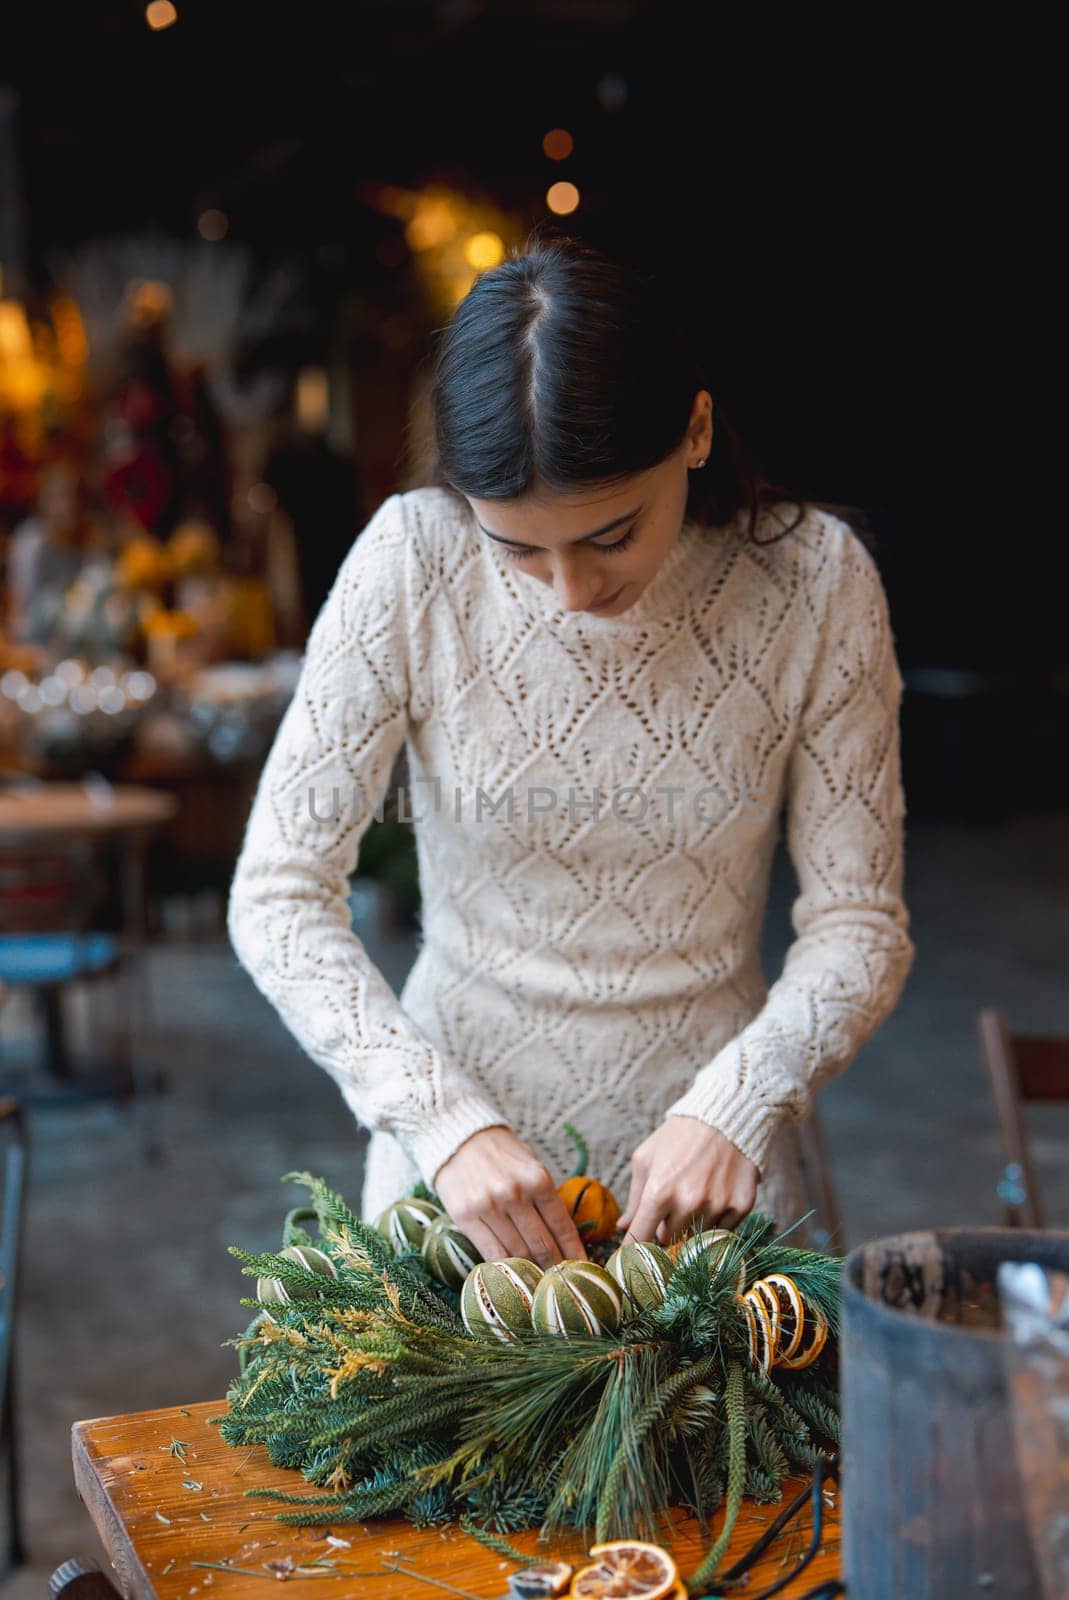 In a crafting masterclass, a young lady learns to make Christmas decorations. High quality photo